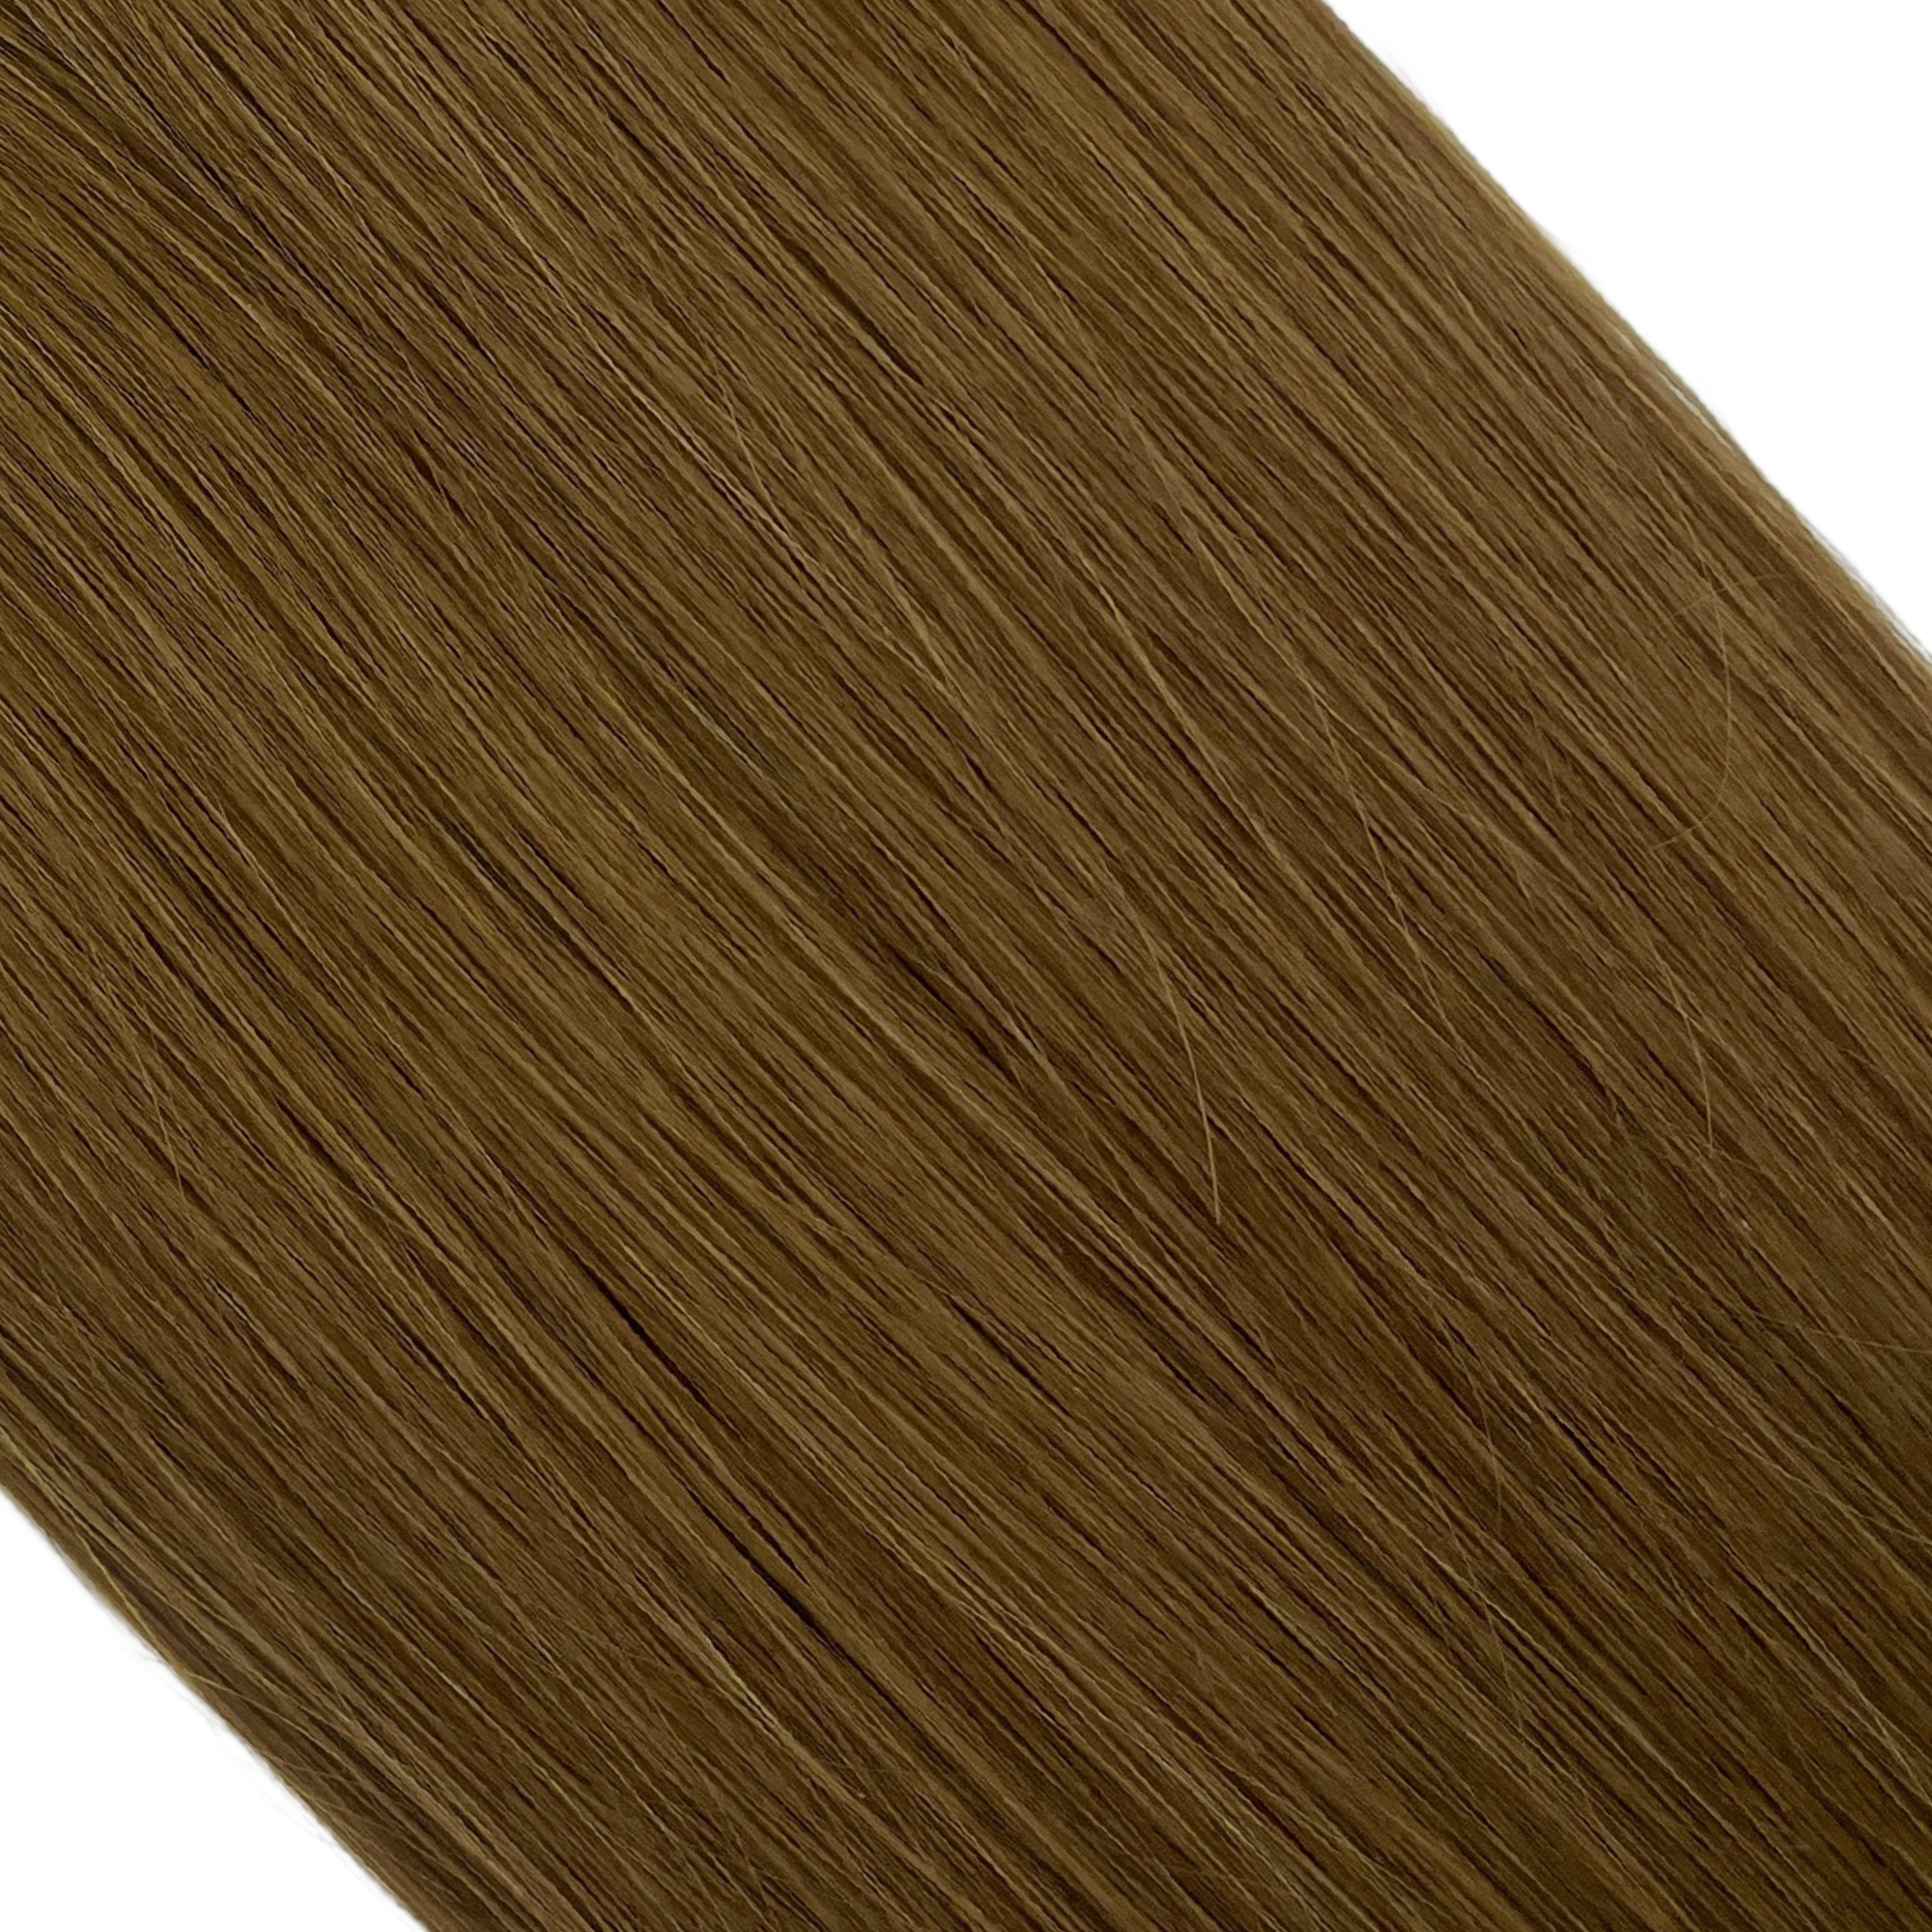 "hair rehab london 22" tape hair extensions shade swatch titled hollywood hottie"